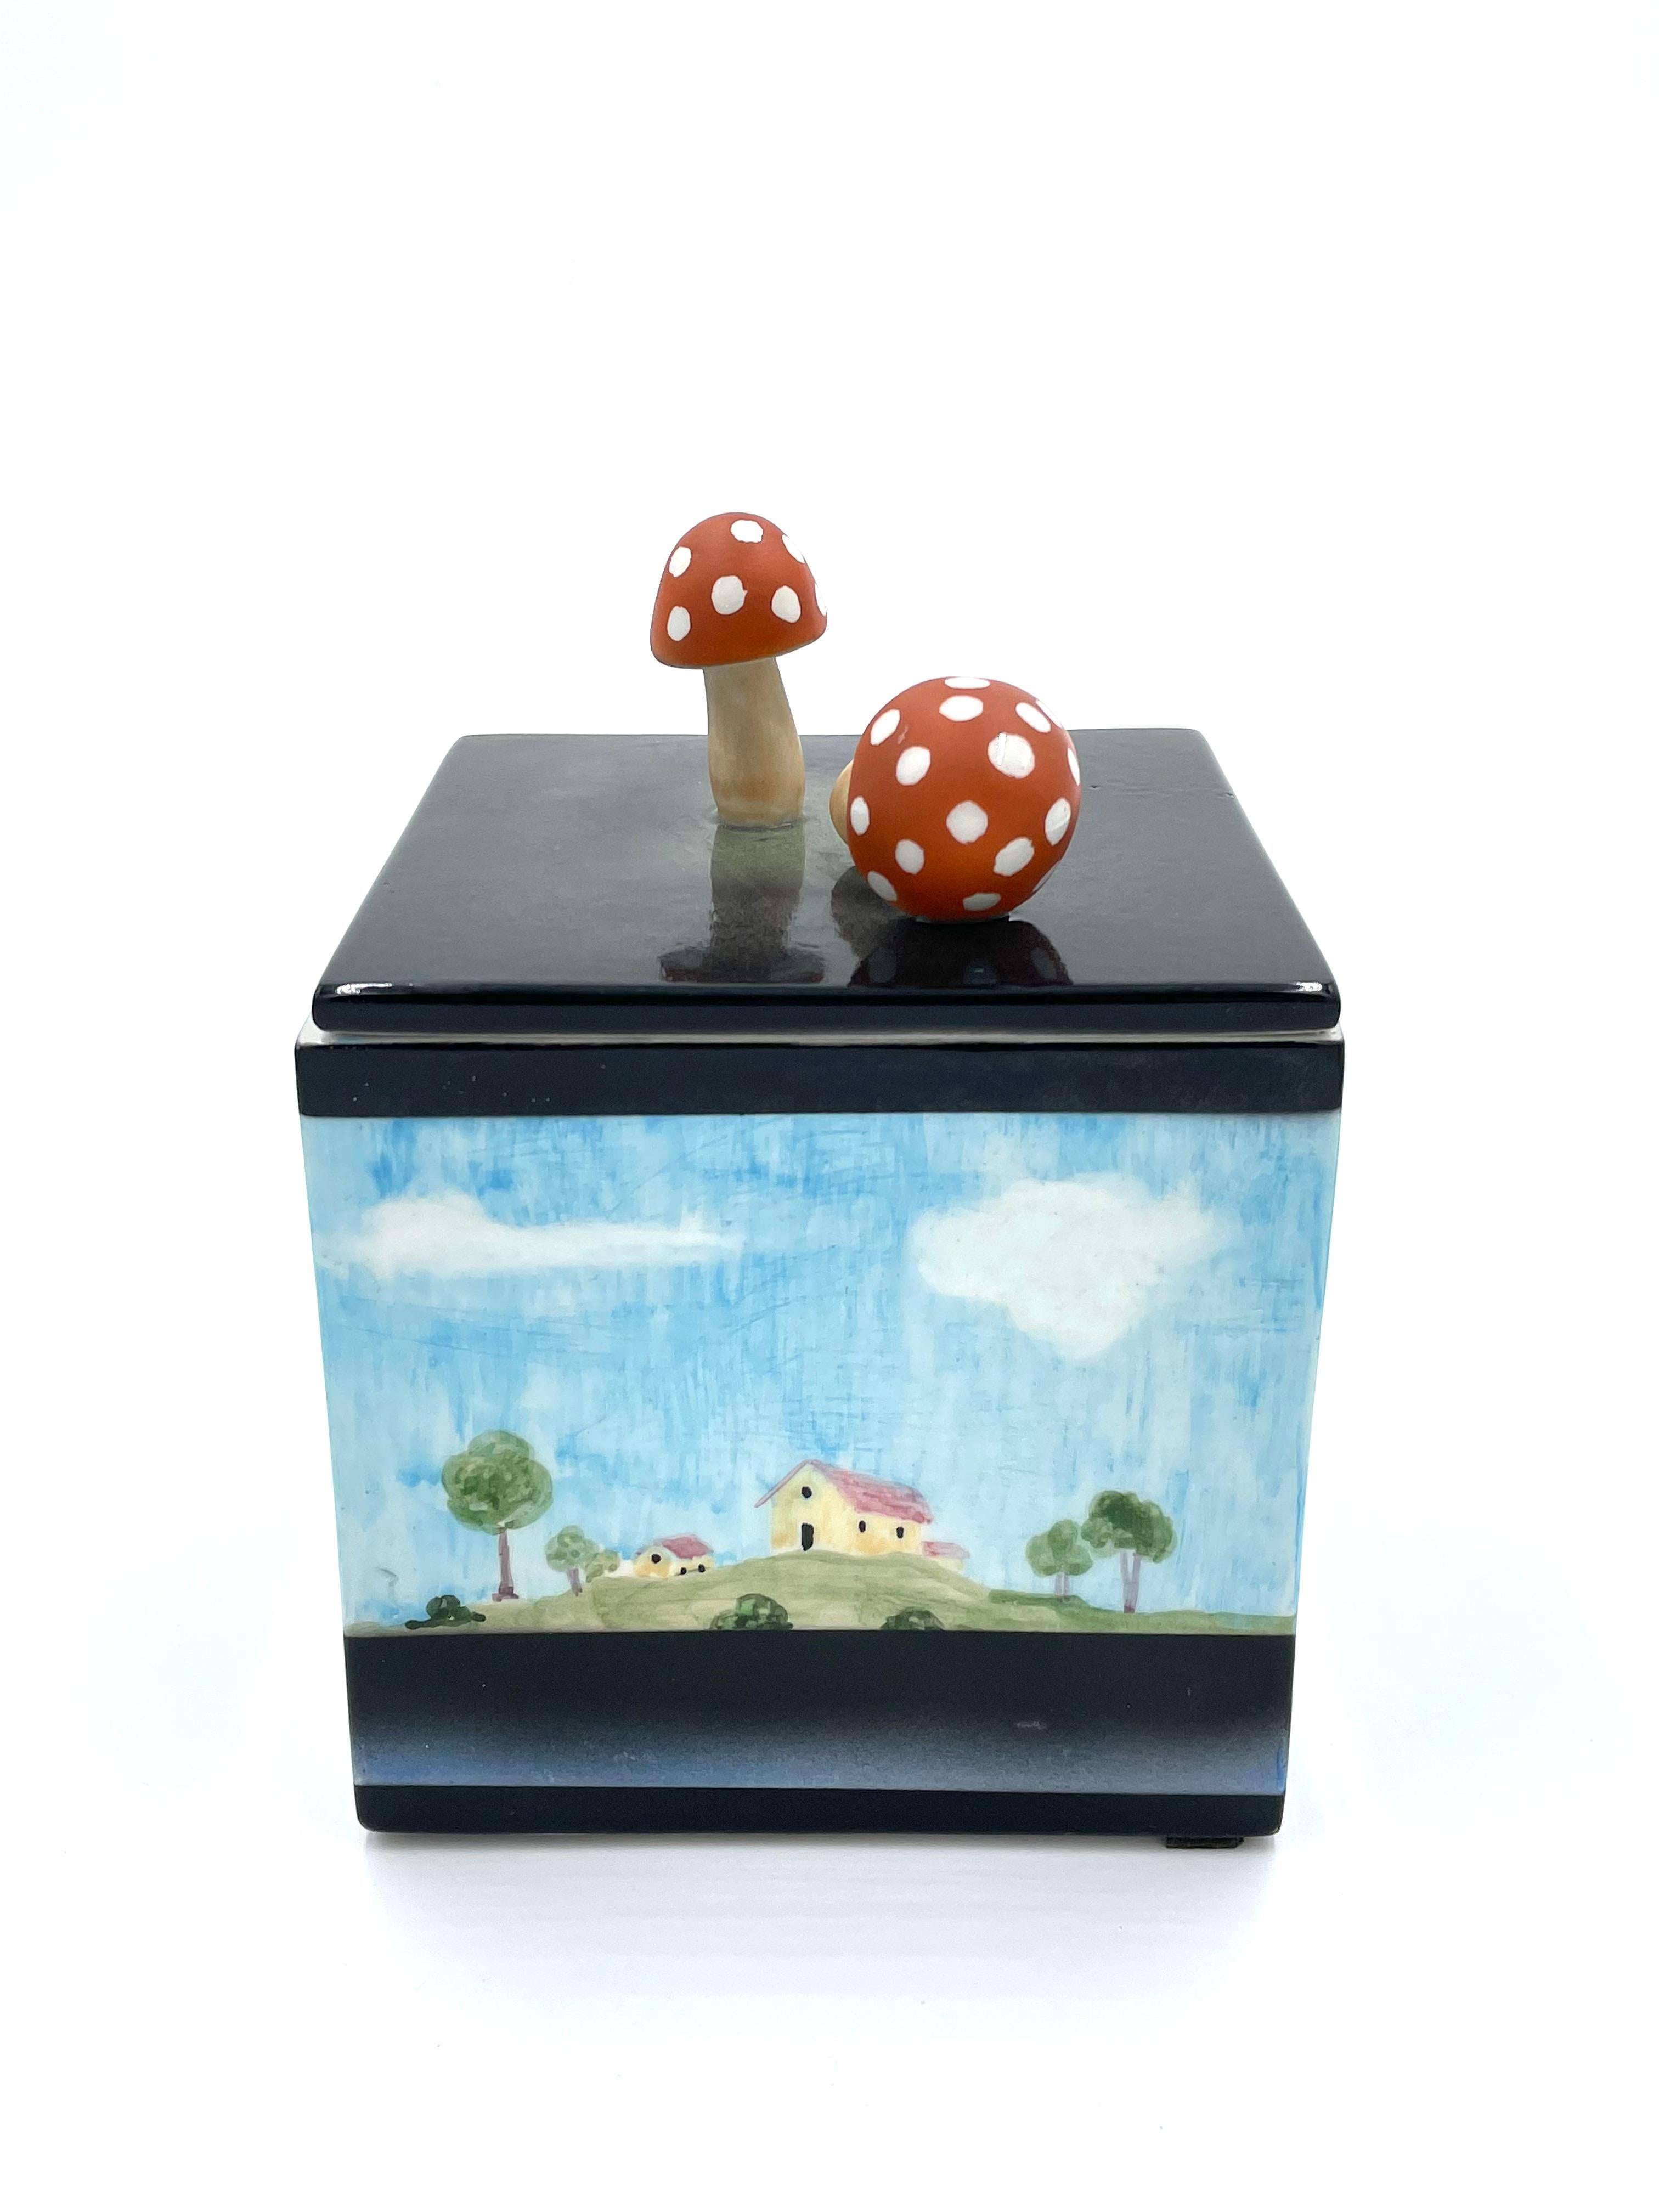 Box made of ceramic by the Lenci Manufactory in Turin, around the late 1950s and early 1960s.

The box in question is is cubic in shape and features a lid with a figurative knob, as two mushrooms are depicted. The side faces of the box are painted